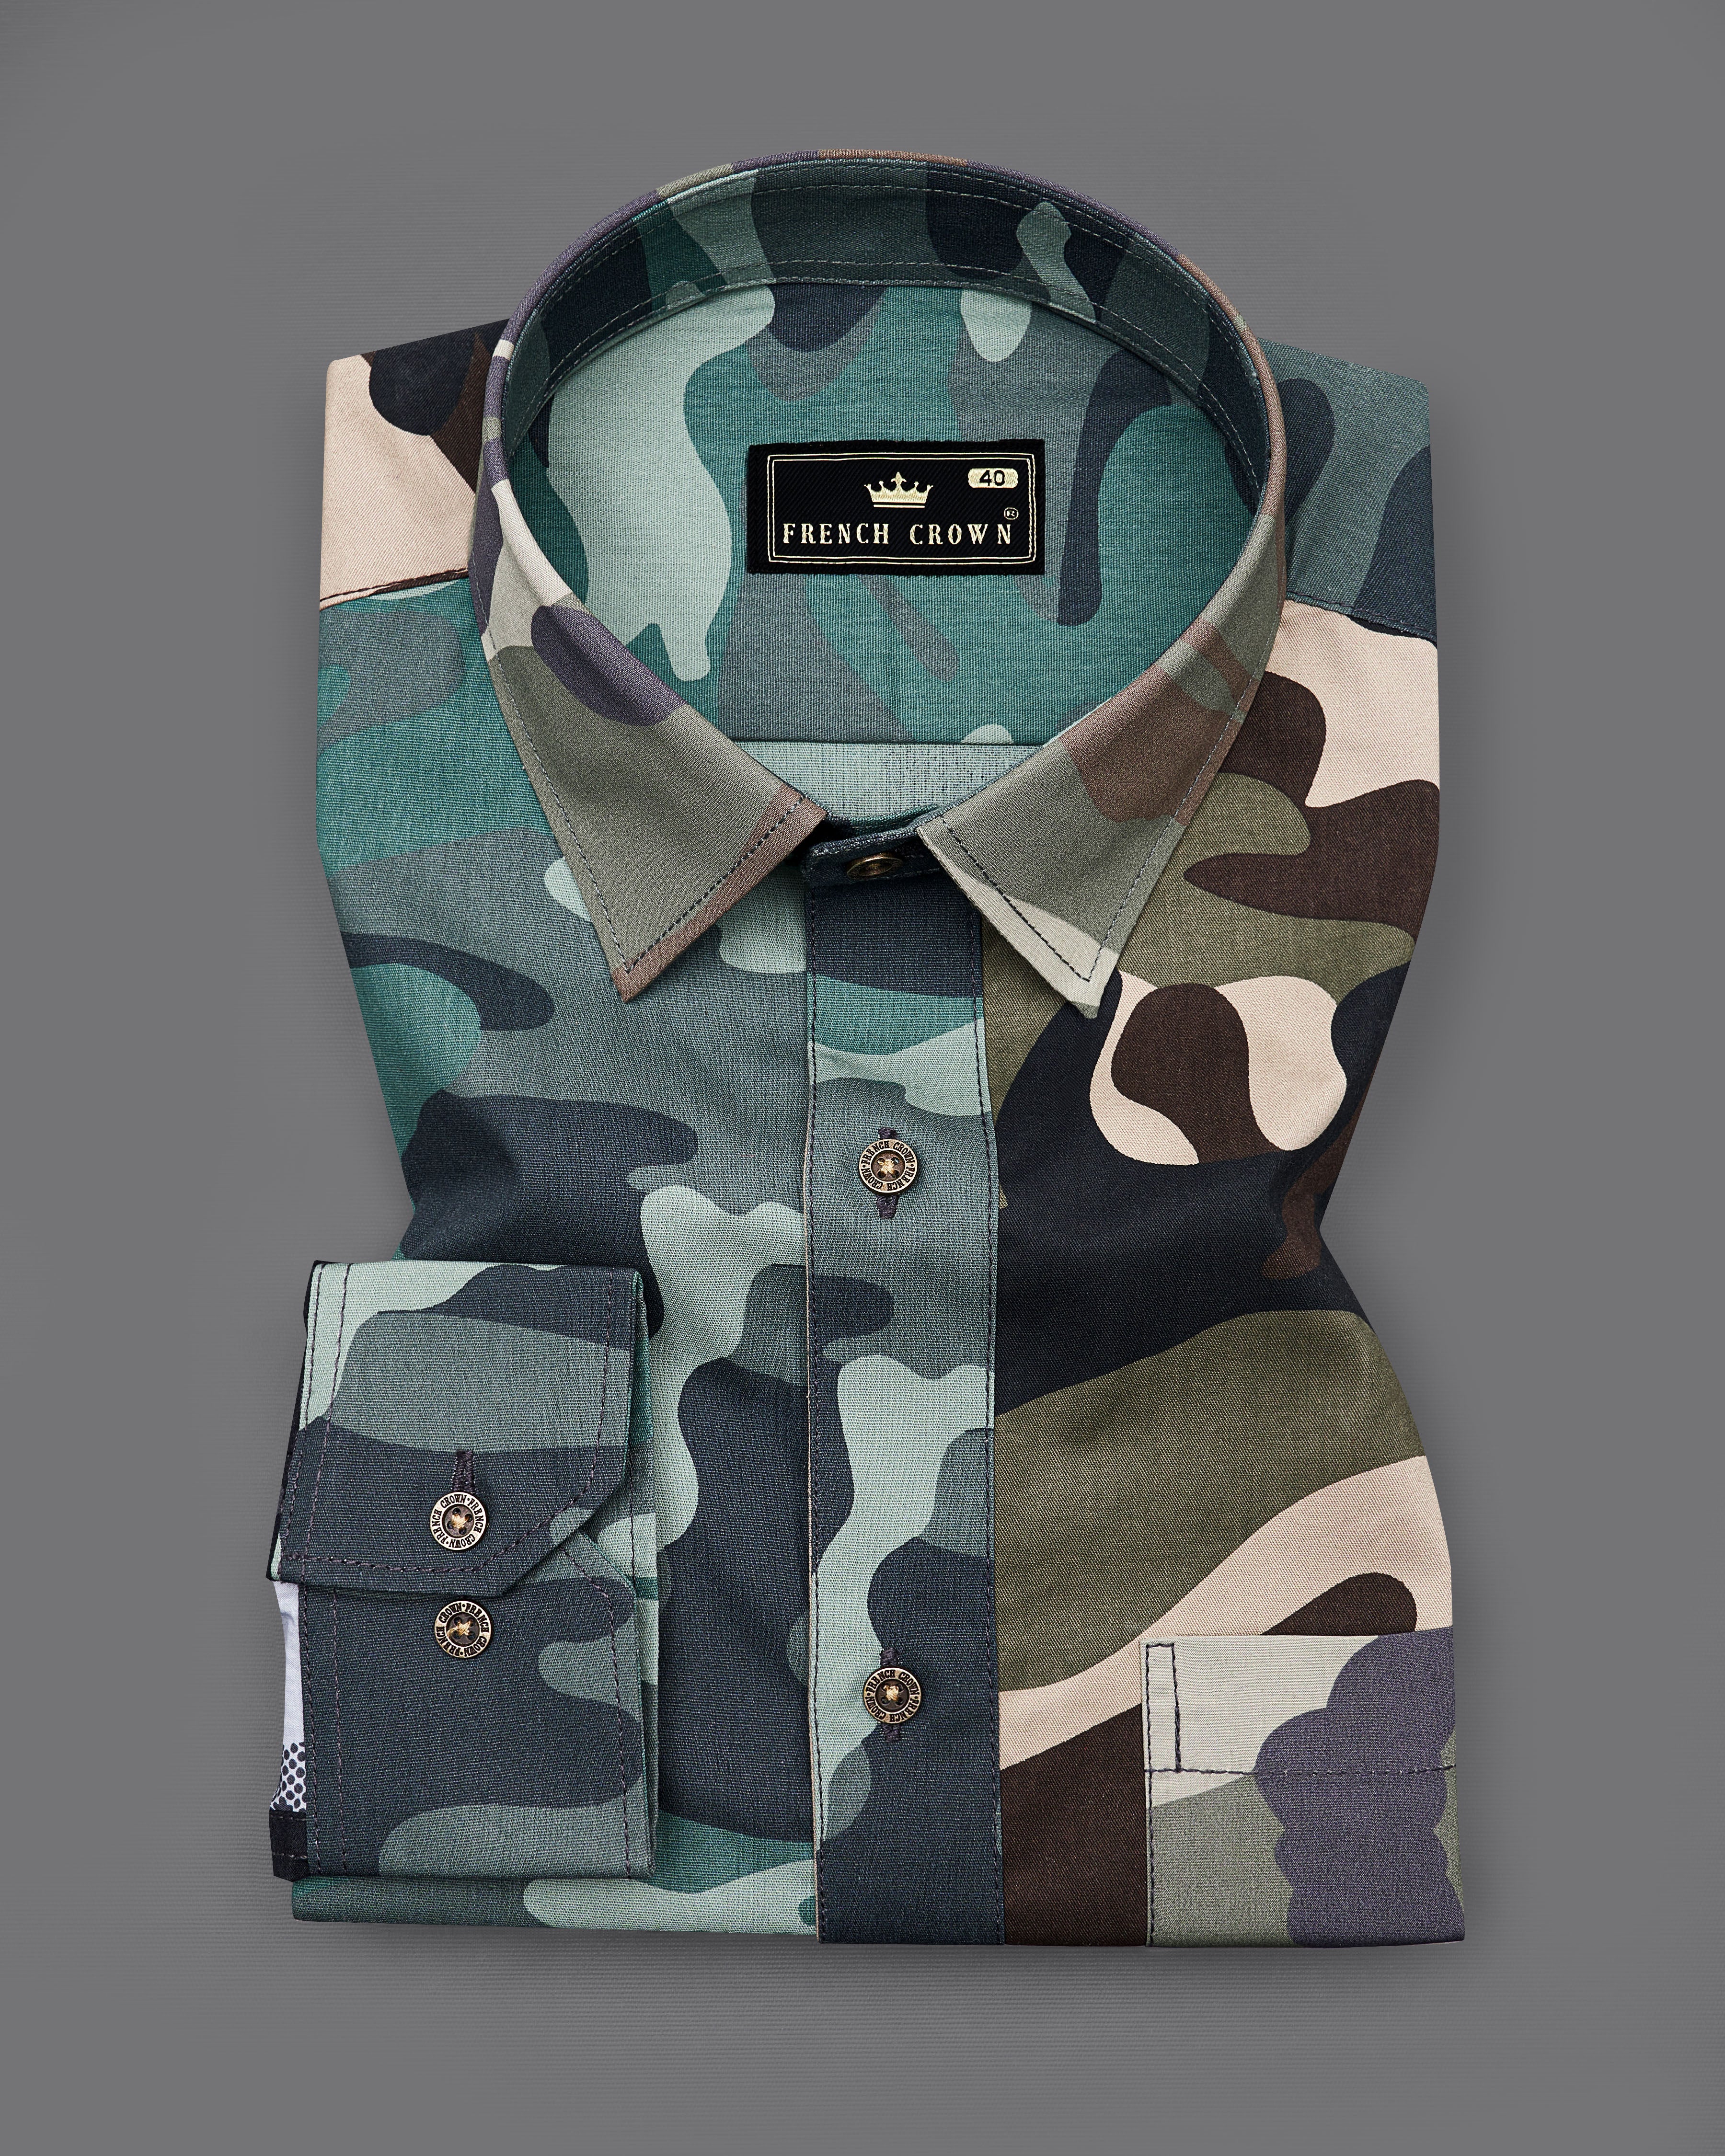 Casal Green with Gunmetal Blue Multicolour Camouflage Military Printed Royal Oxford Designer Shirt 8907-MB-P331-38, 8907-MB-P331-H-38,  8907-MB-P331-39,  8907-MB-P331-H-39,  8907-MB-P331-40,  8907-MB-P331-H-40,  8907-MB-P331-42,  8907-MB-P331-H-42,  8907-MB-P331-44,  8907-MB-P331-H-44,  8907-MB-P331-46,  8907-MB-P331-H-46,  8907-MB-P331-48,  8907-MB-P331-H-48,  8907-MB-P331-50,  8907-MB-P331-H-50,  8907-MB-P331-52,  8907-MB-P331-H-52